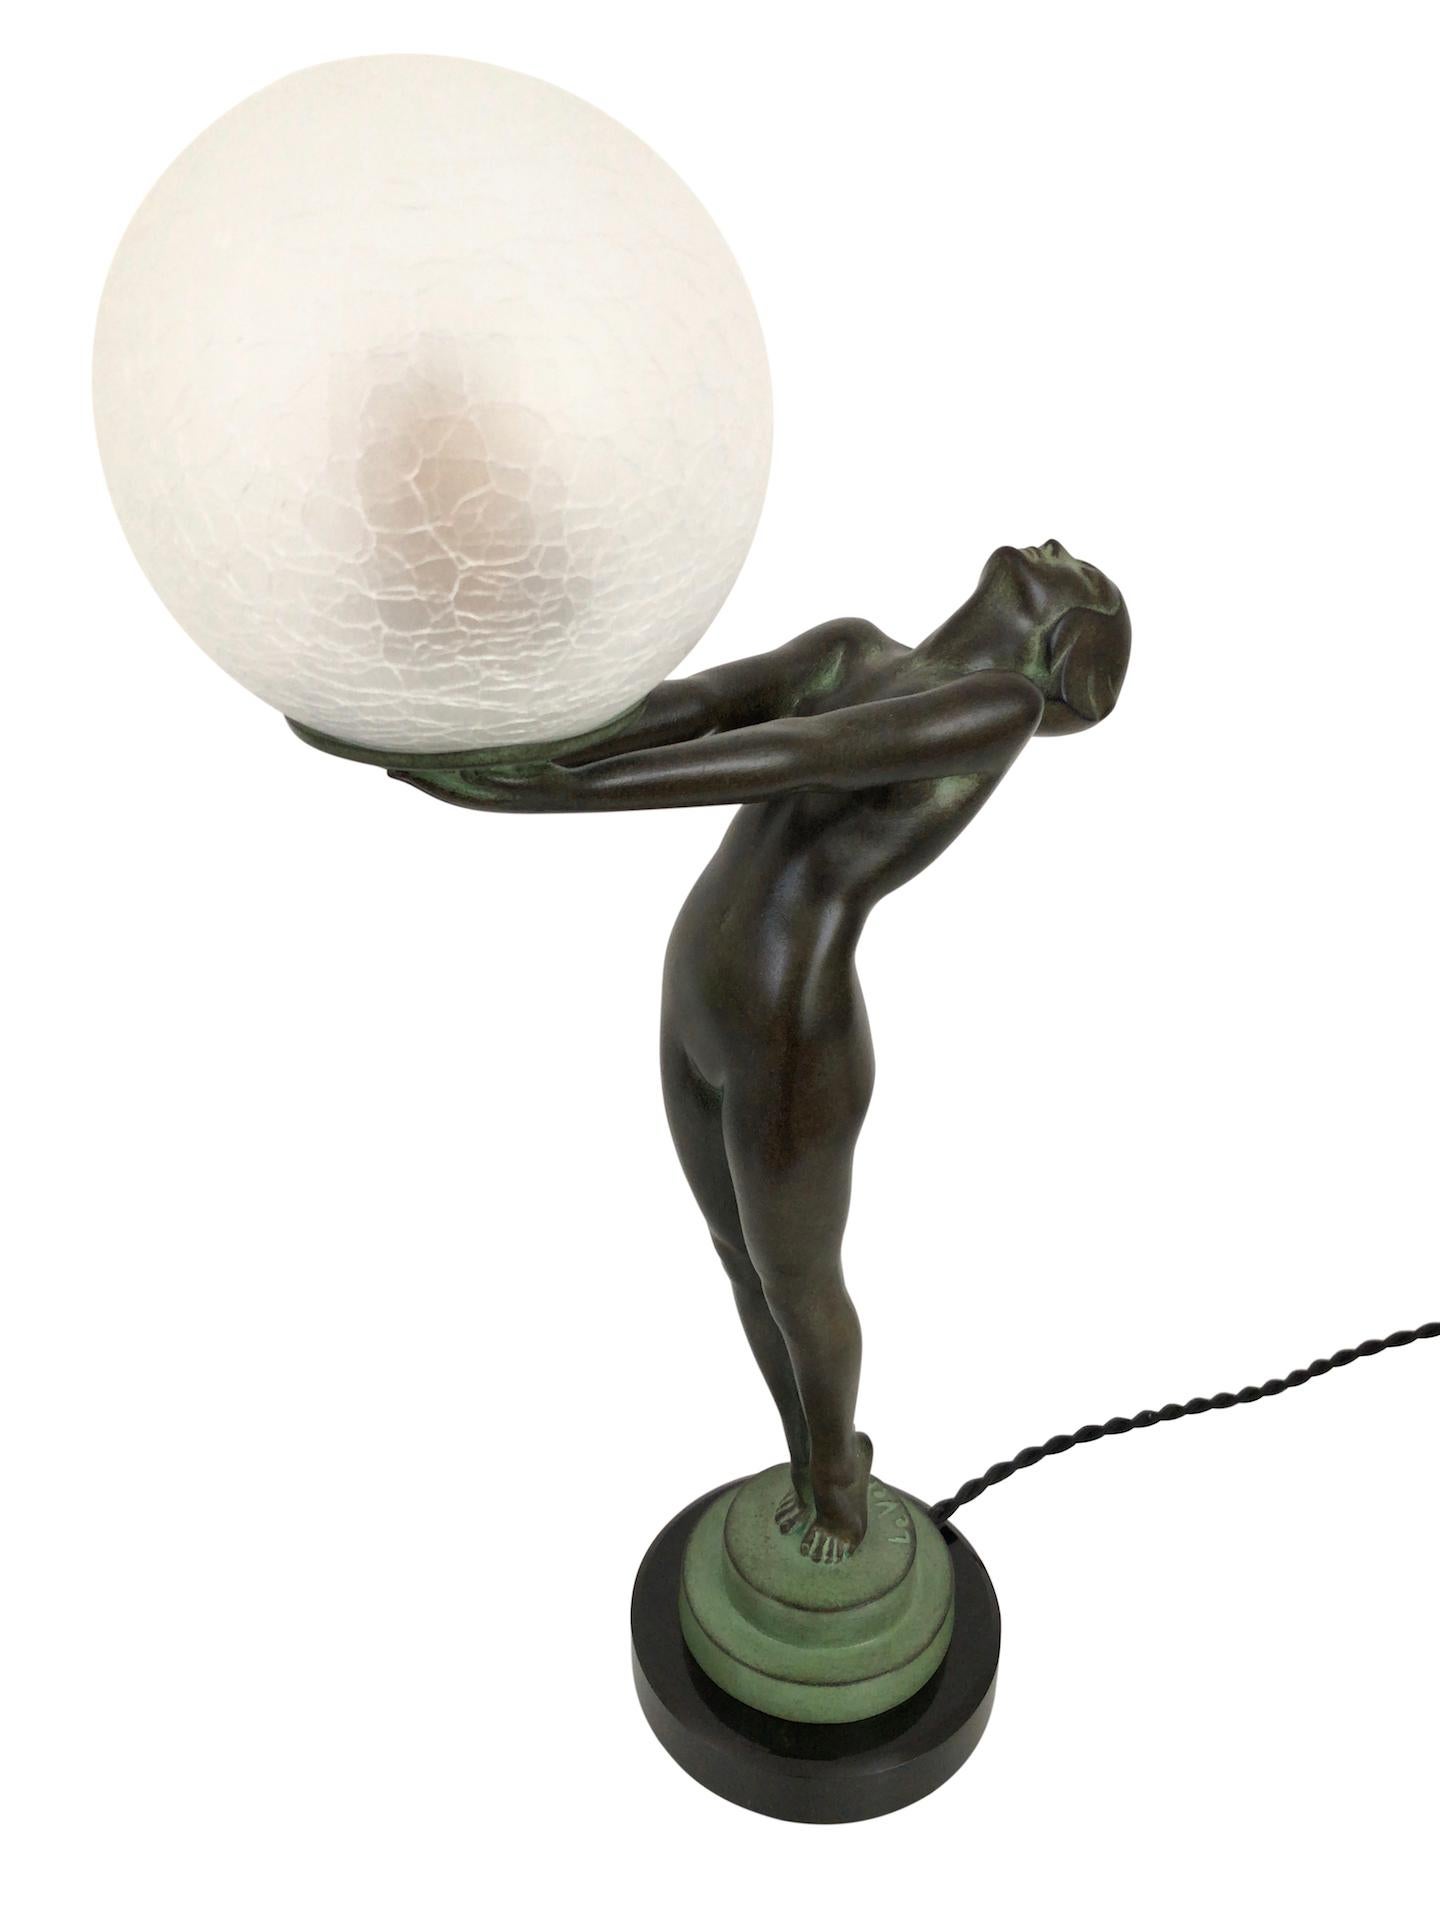 Contemporary Pair of French Art Deco Style Clarte Sculptures designed by Max Le Verrier 1928 For Sale